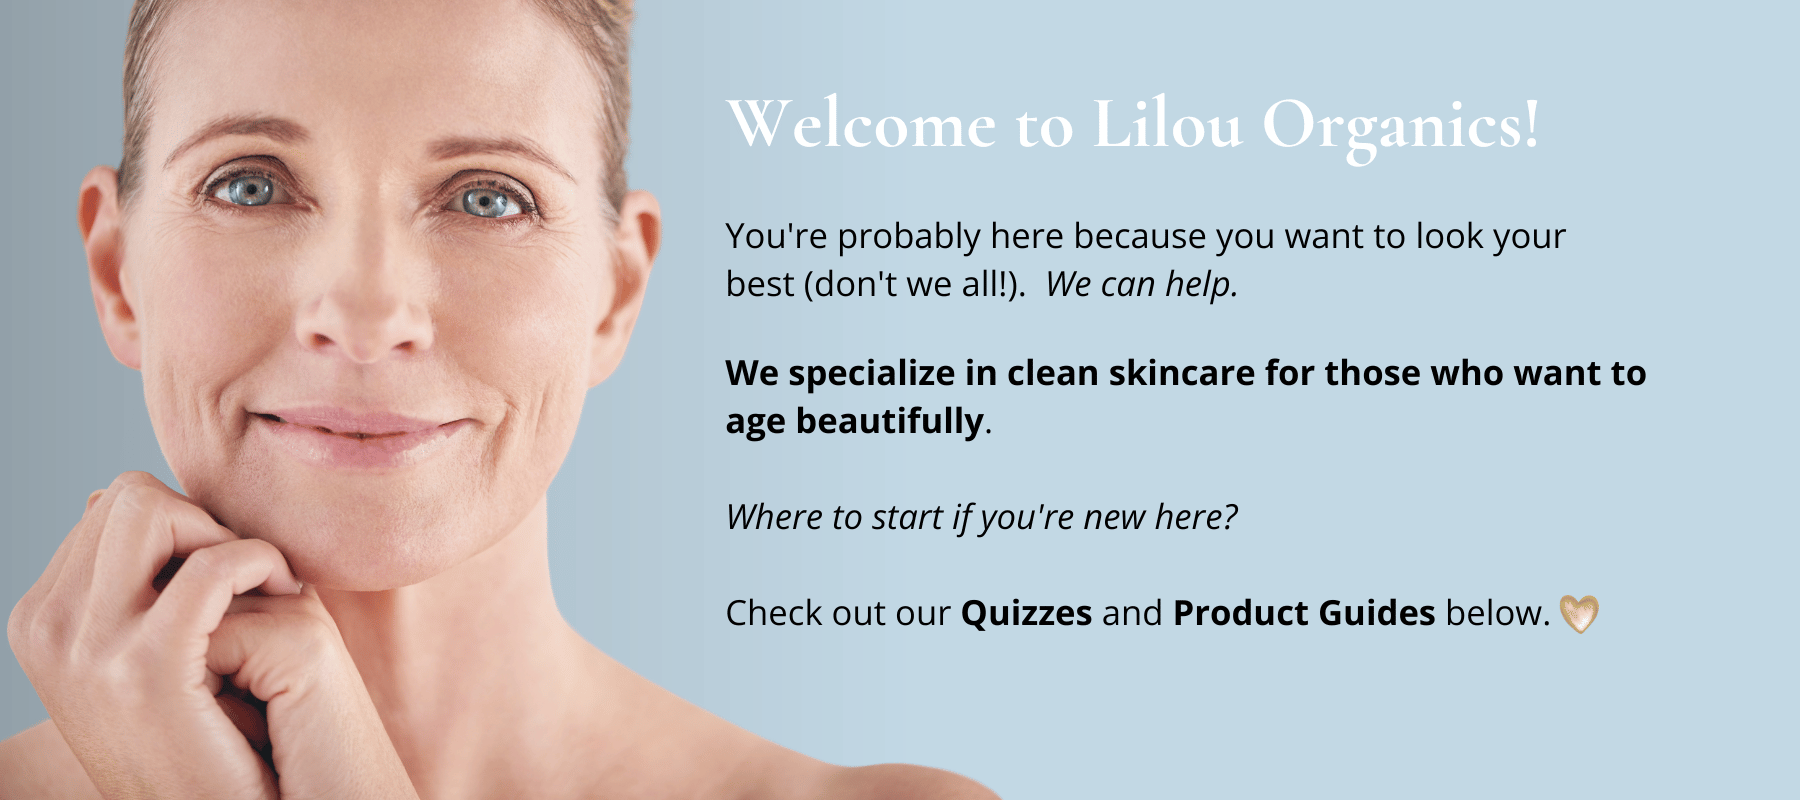 Clean skincare quiz and products from Lilou Organics in Canada.